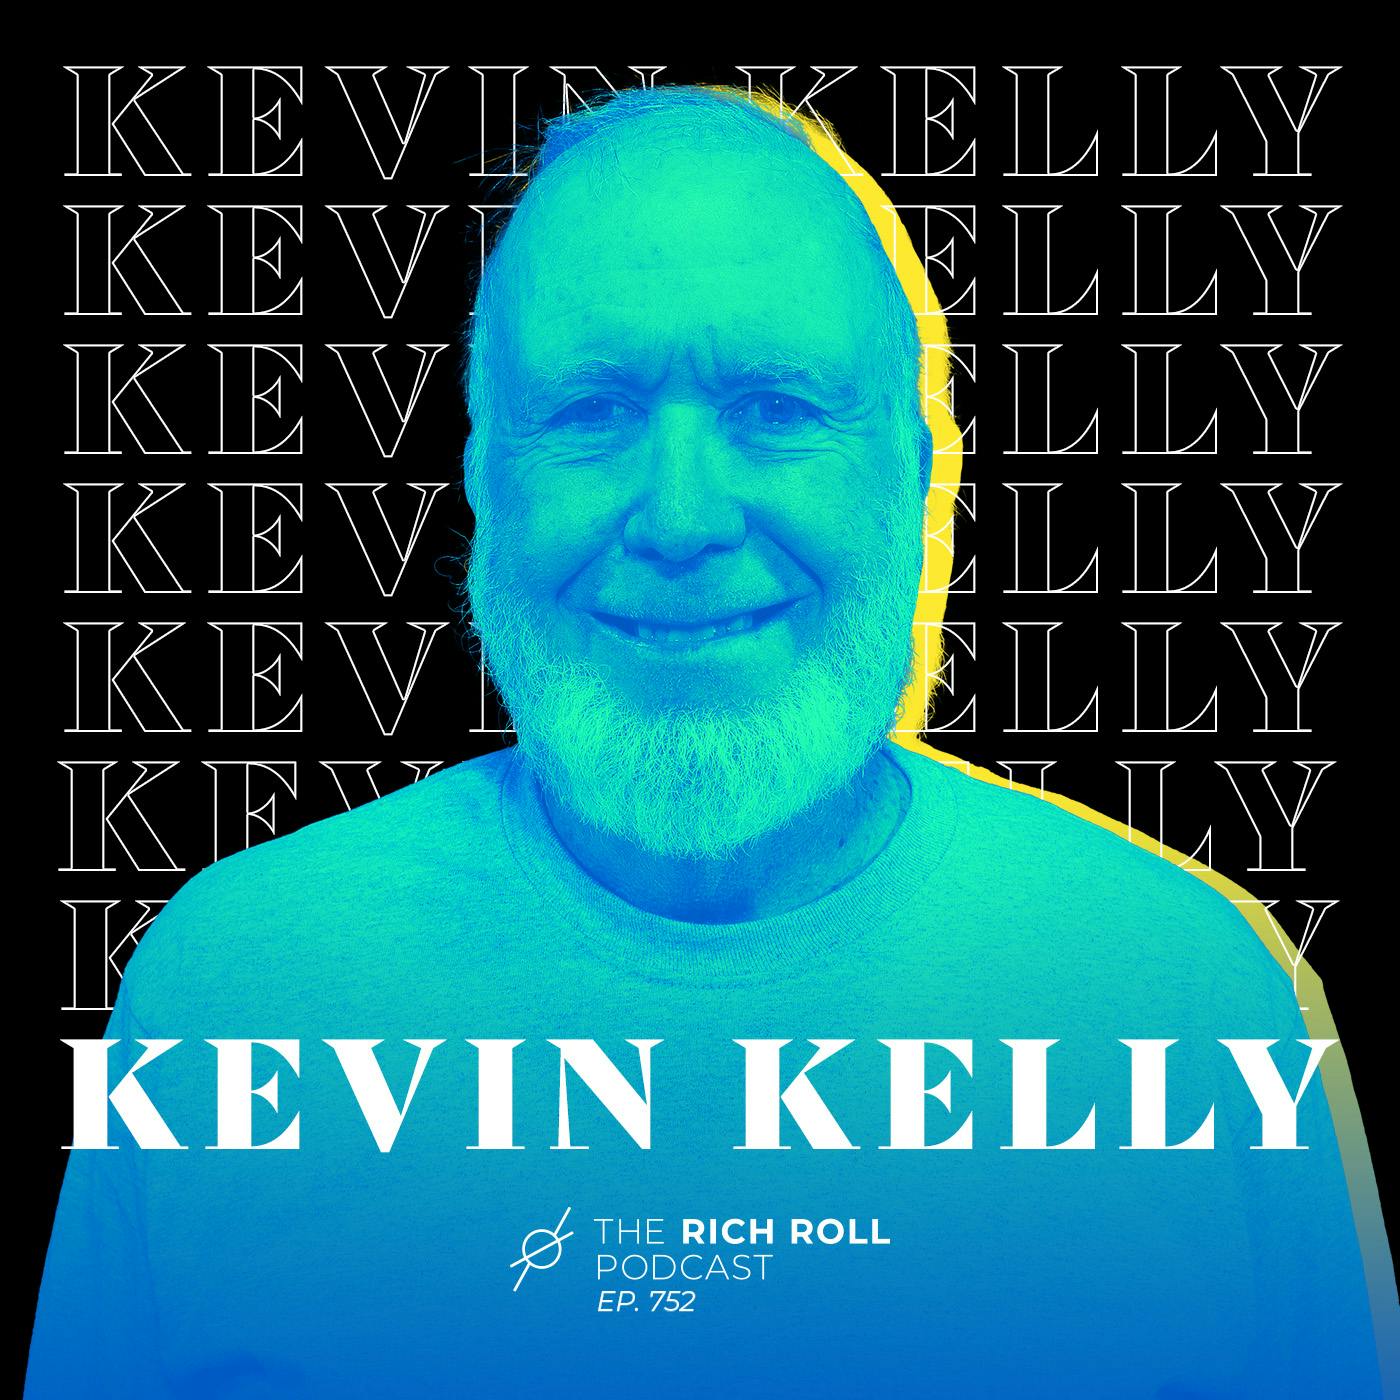 Excellent Advice For Living: Kevin Kelly On Wealth, AI, Optimism, & The Future